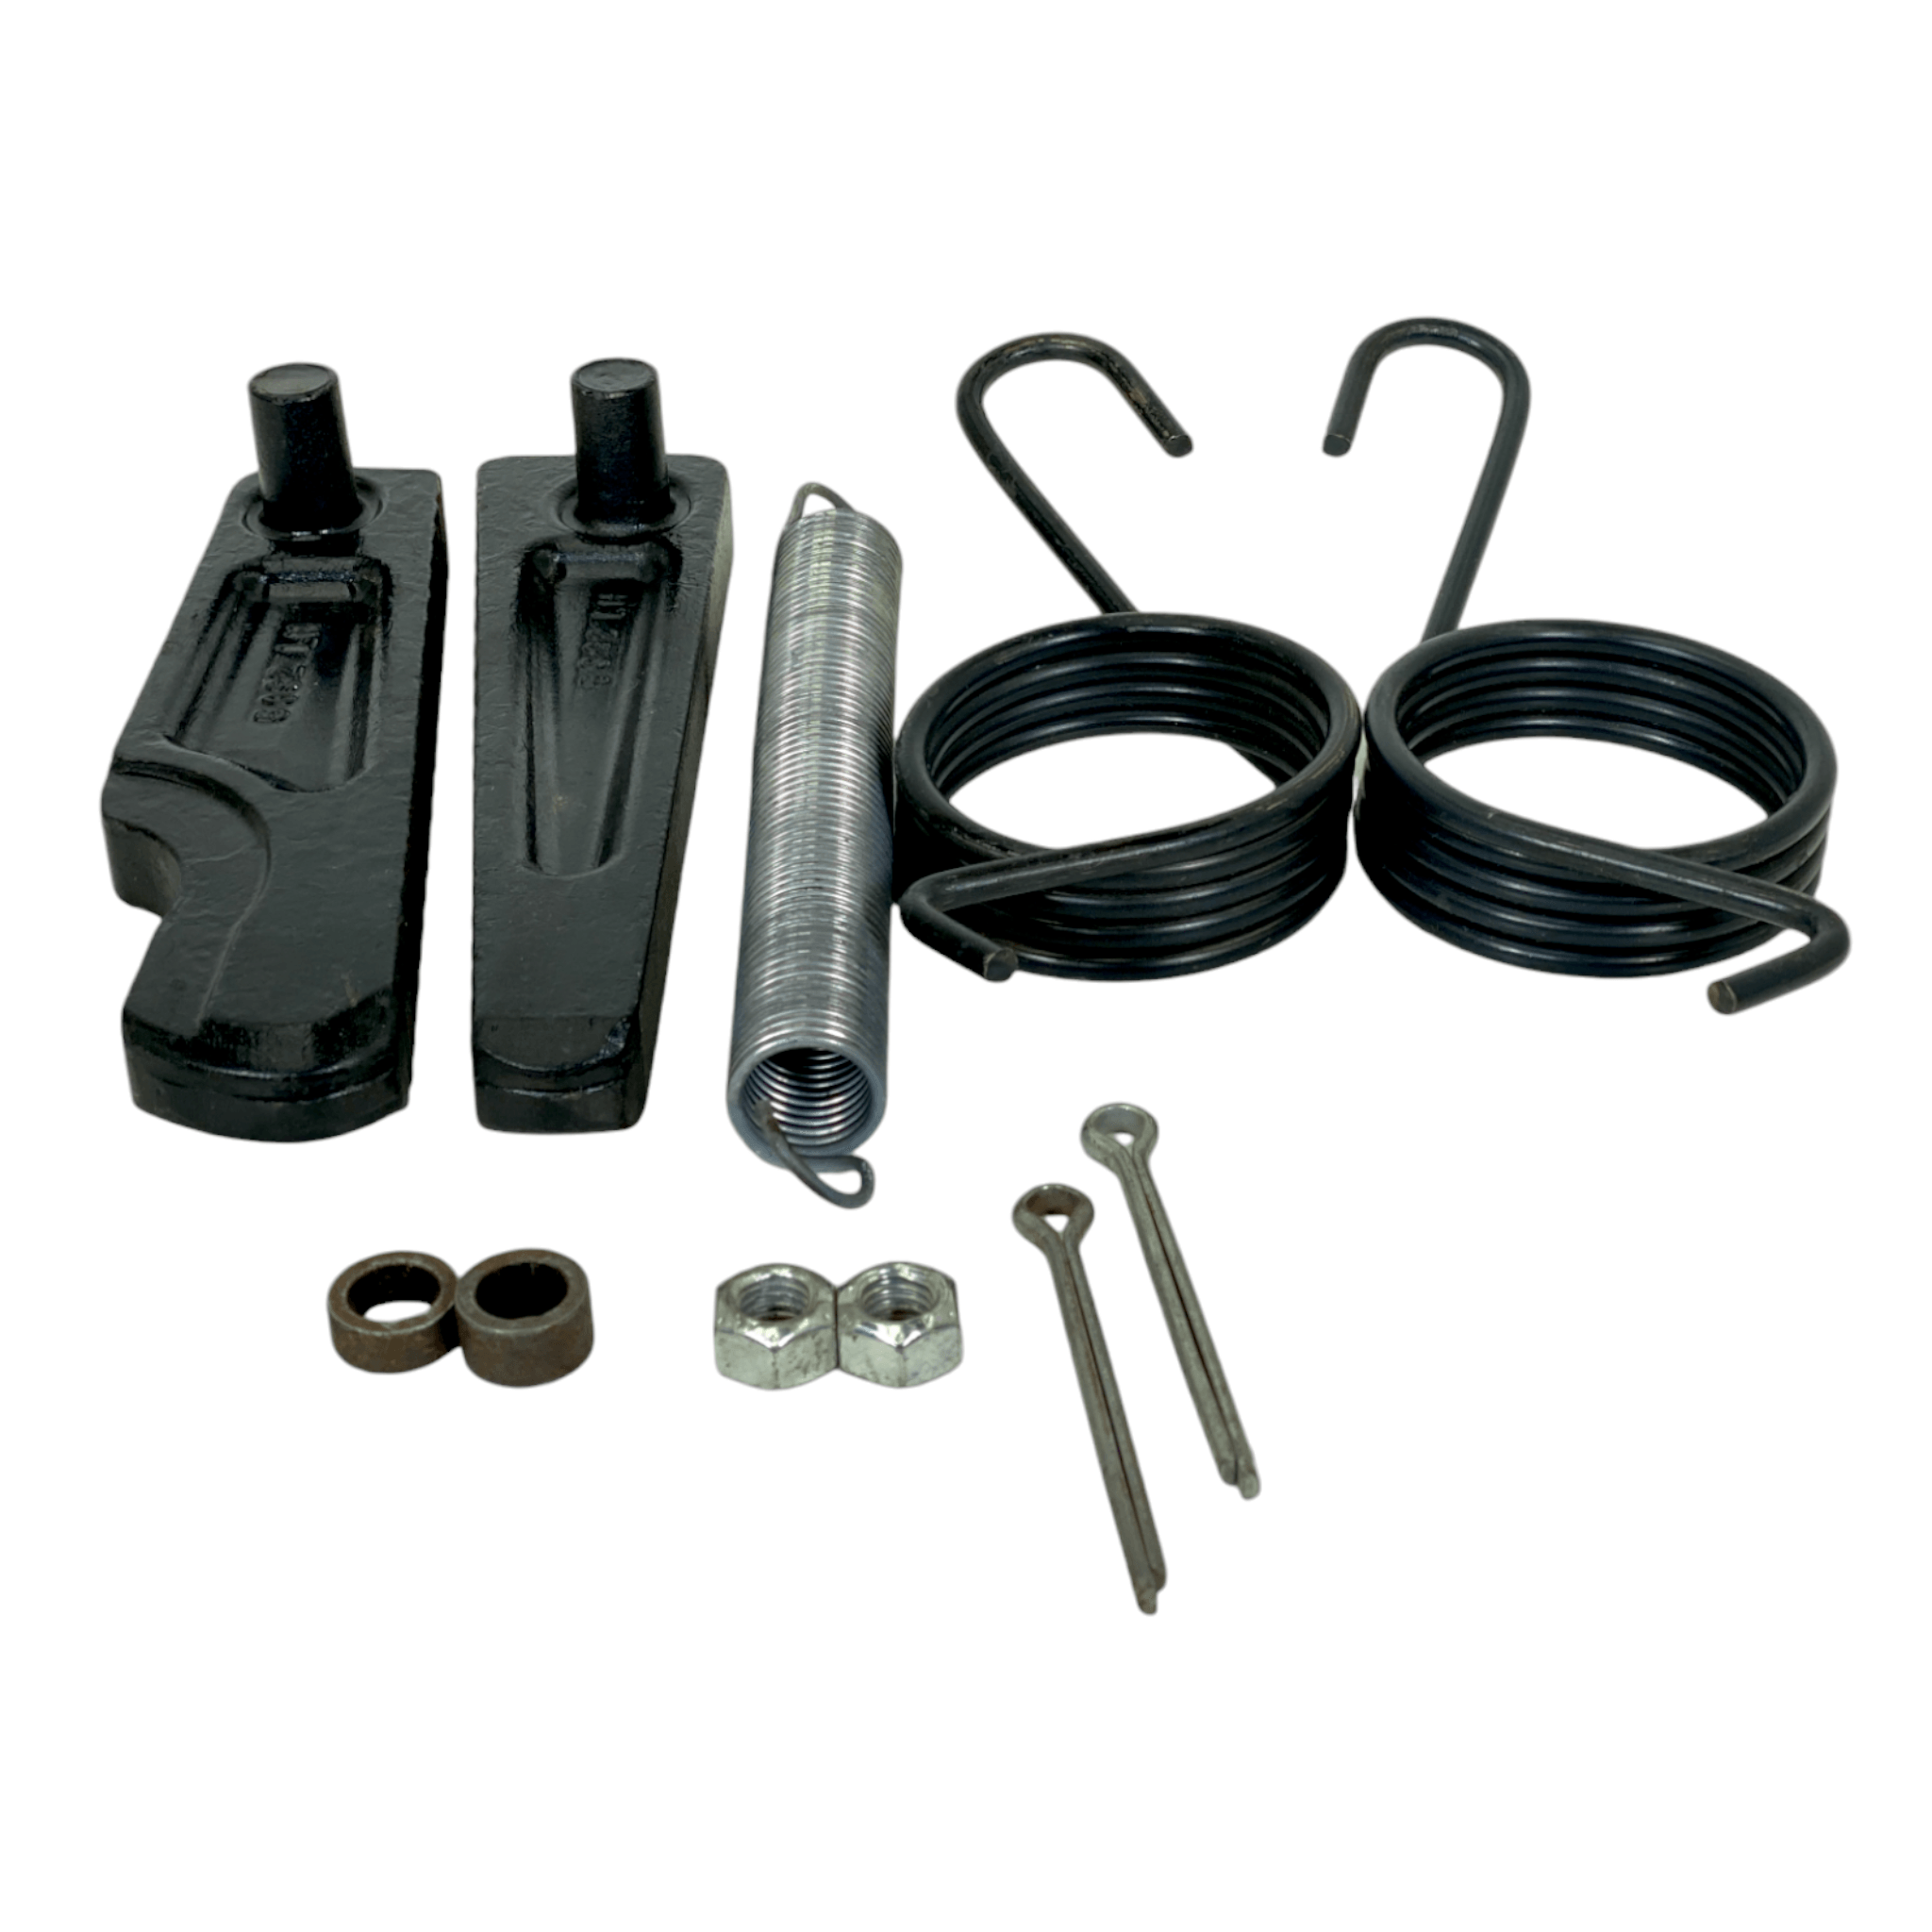 Kit-Rpr-5092L Genuine Fontaine® Left Kit Repair For 5092 Series Fifth Wheels - ADVANCED TRUCK PARTS